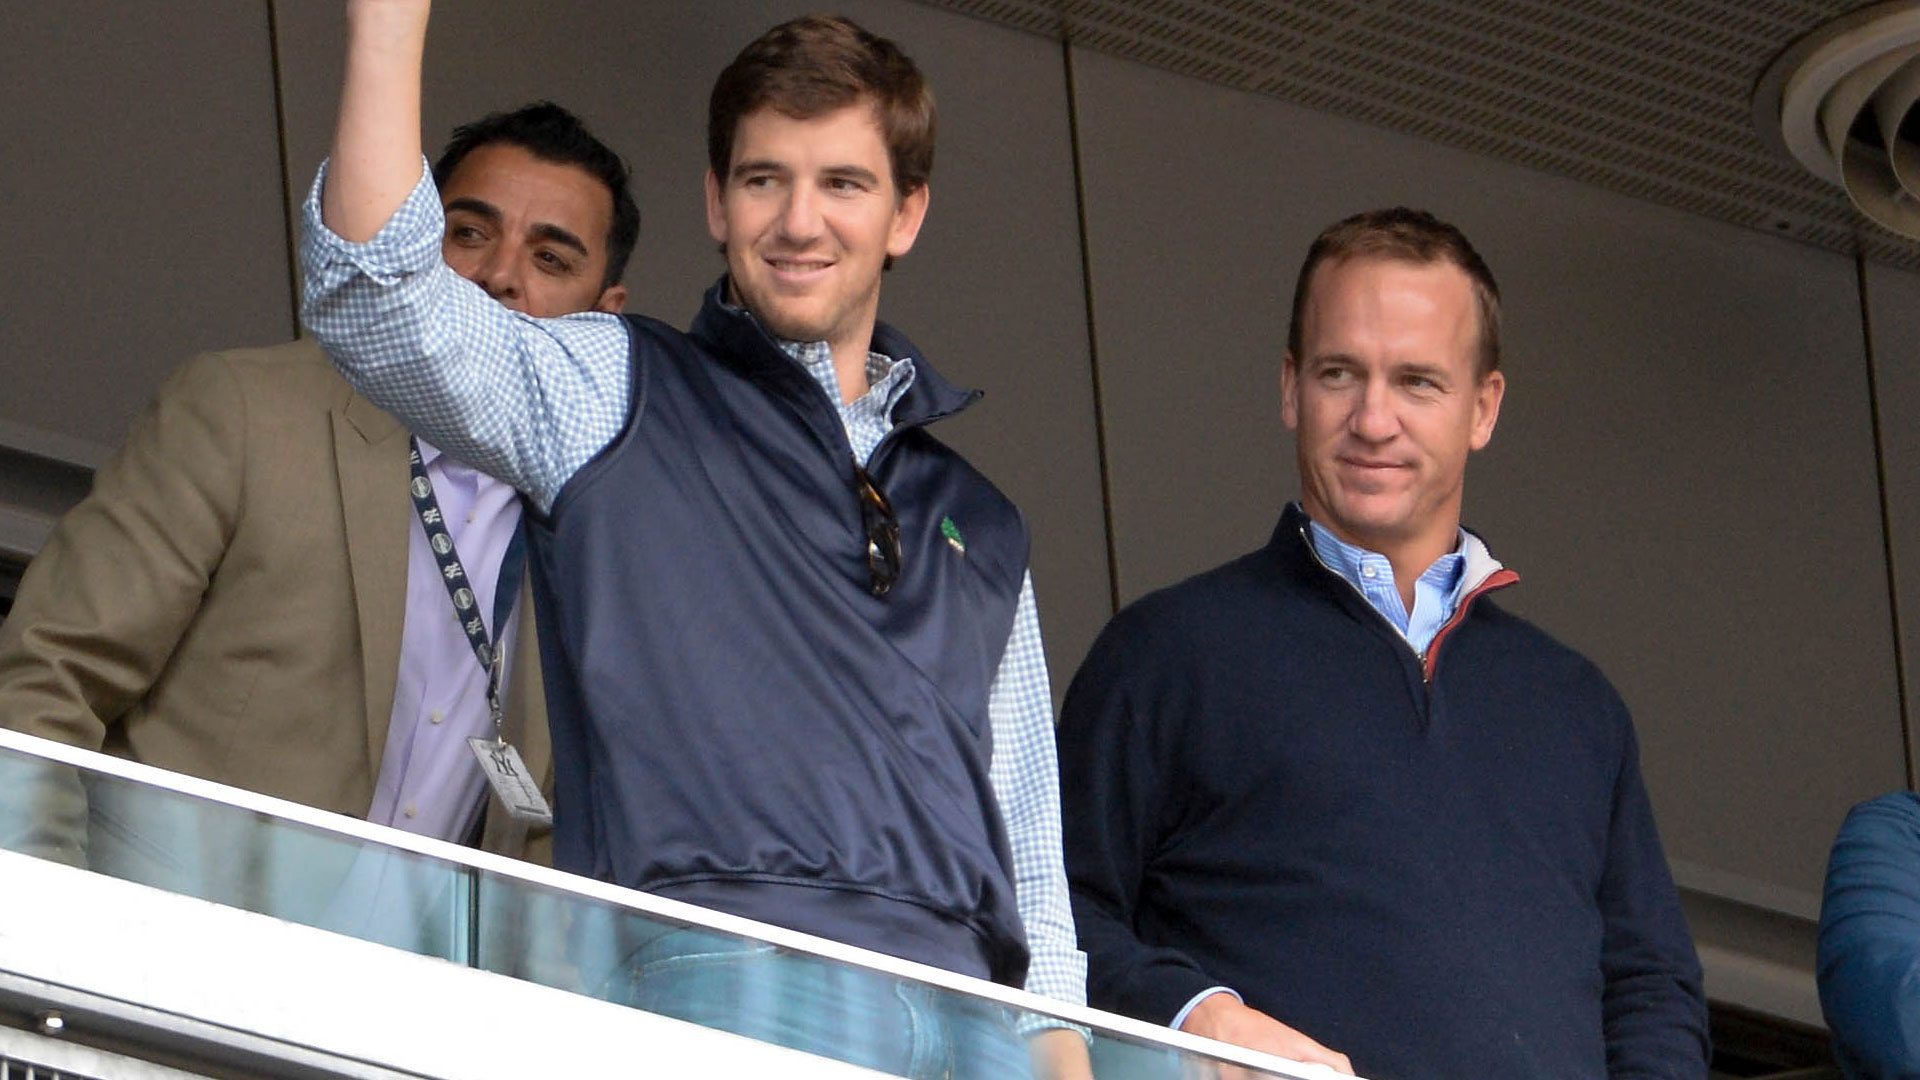 Which NFL Games Will Eli and Peyton Manning Be Calling in 2022?